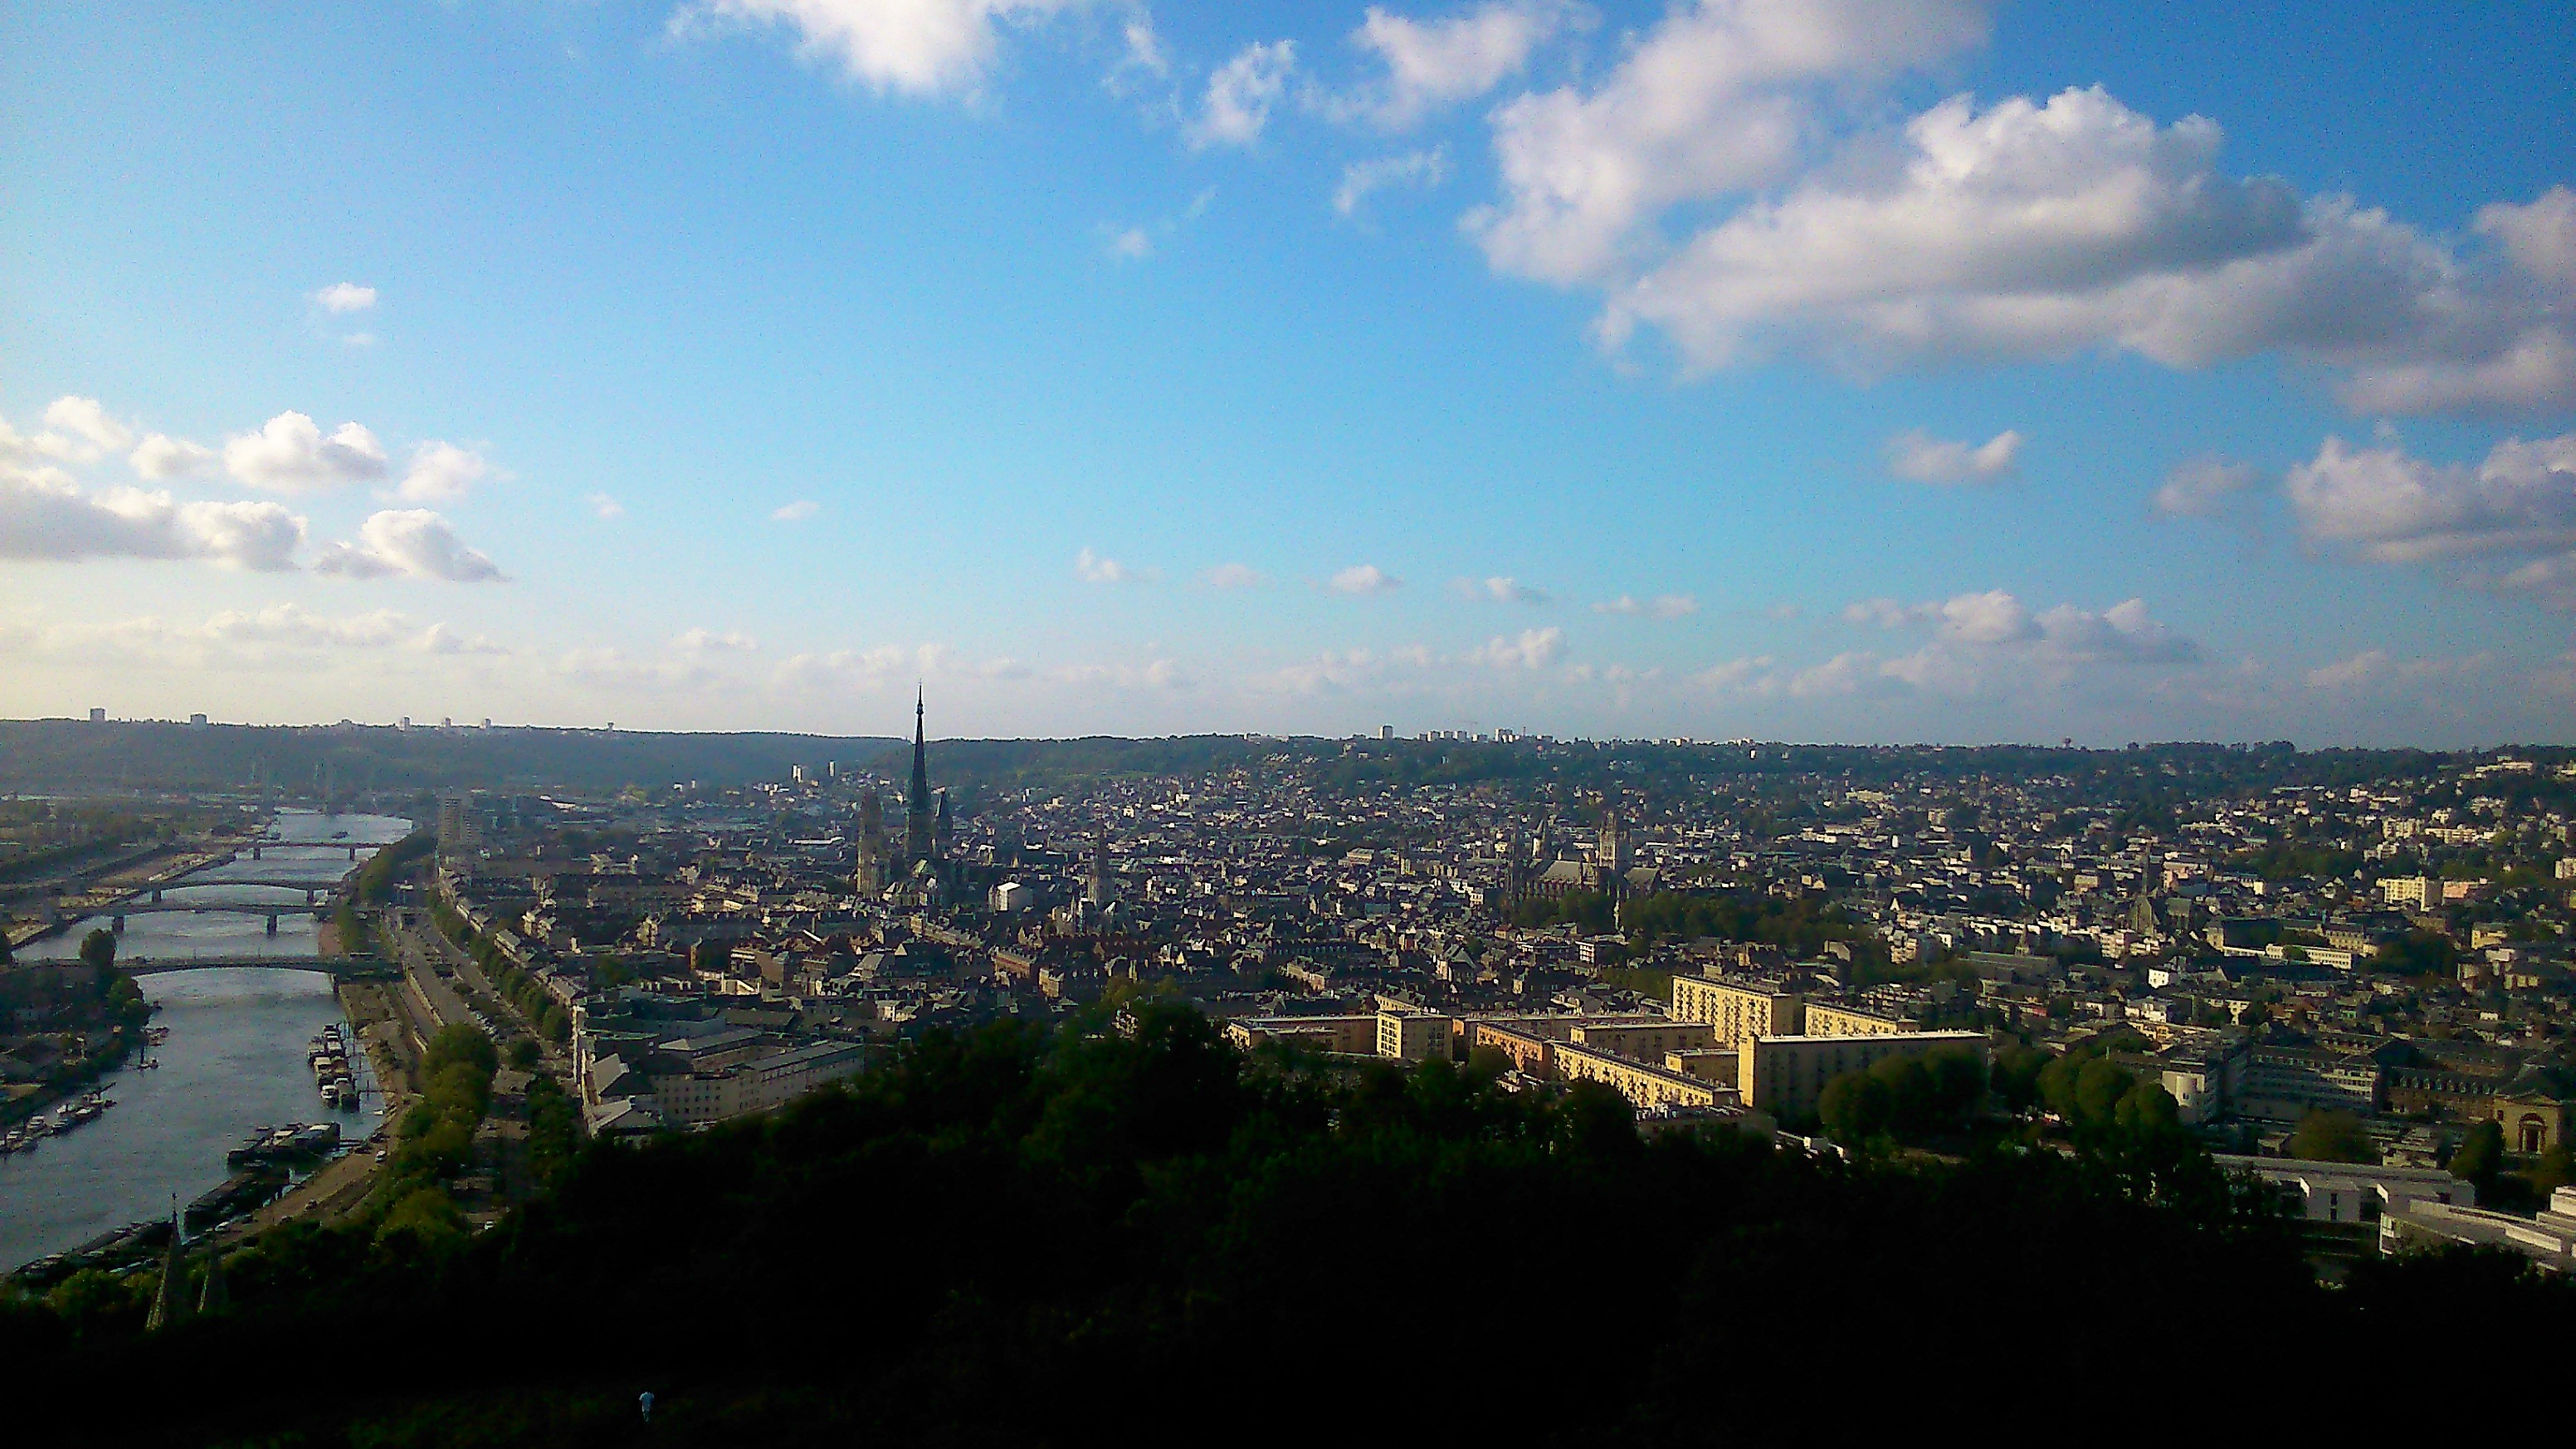 A panorama view of the city of Rouen in Normandy